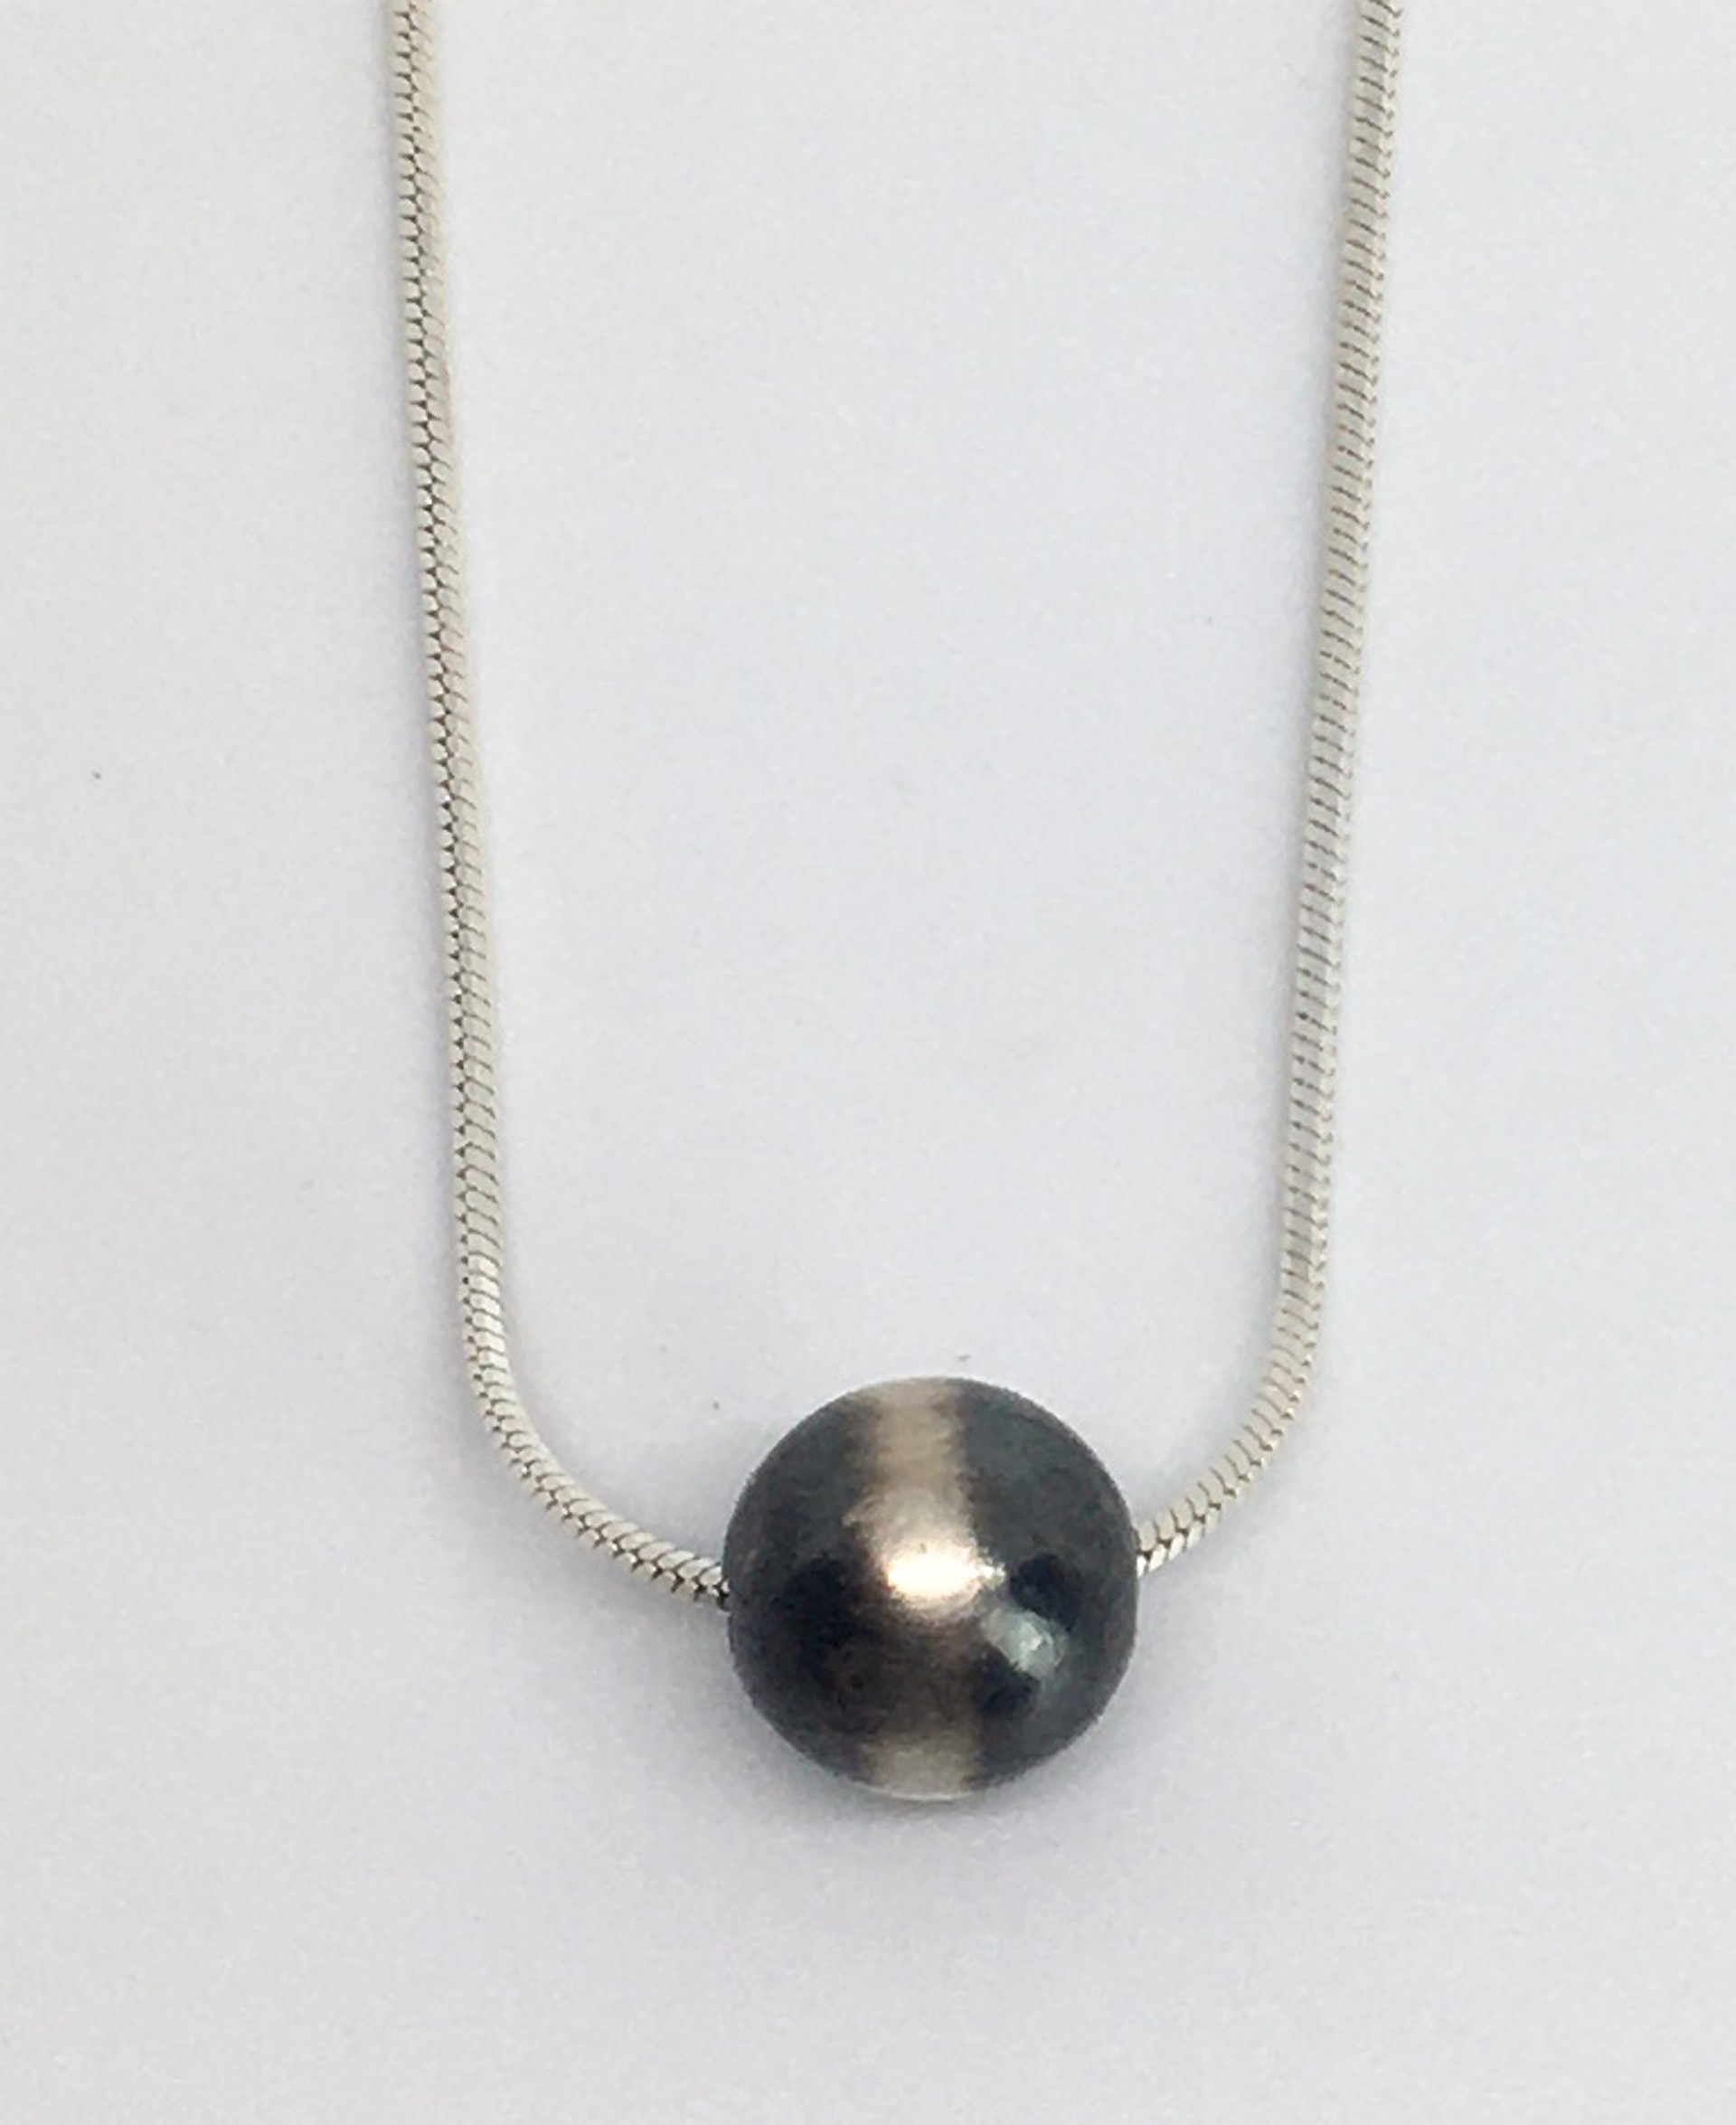 18" Necklace "Unity" ~ Oxidized Sterling Silver Bead by Suzanne Woodworth